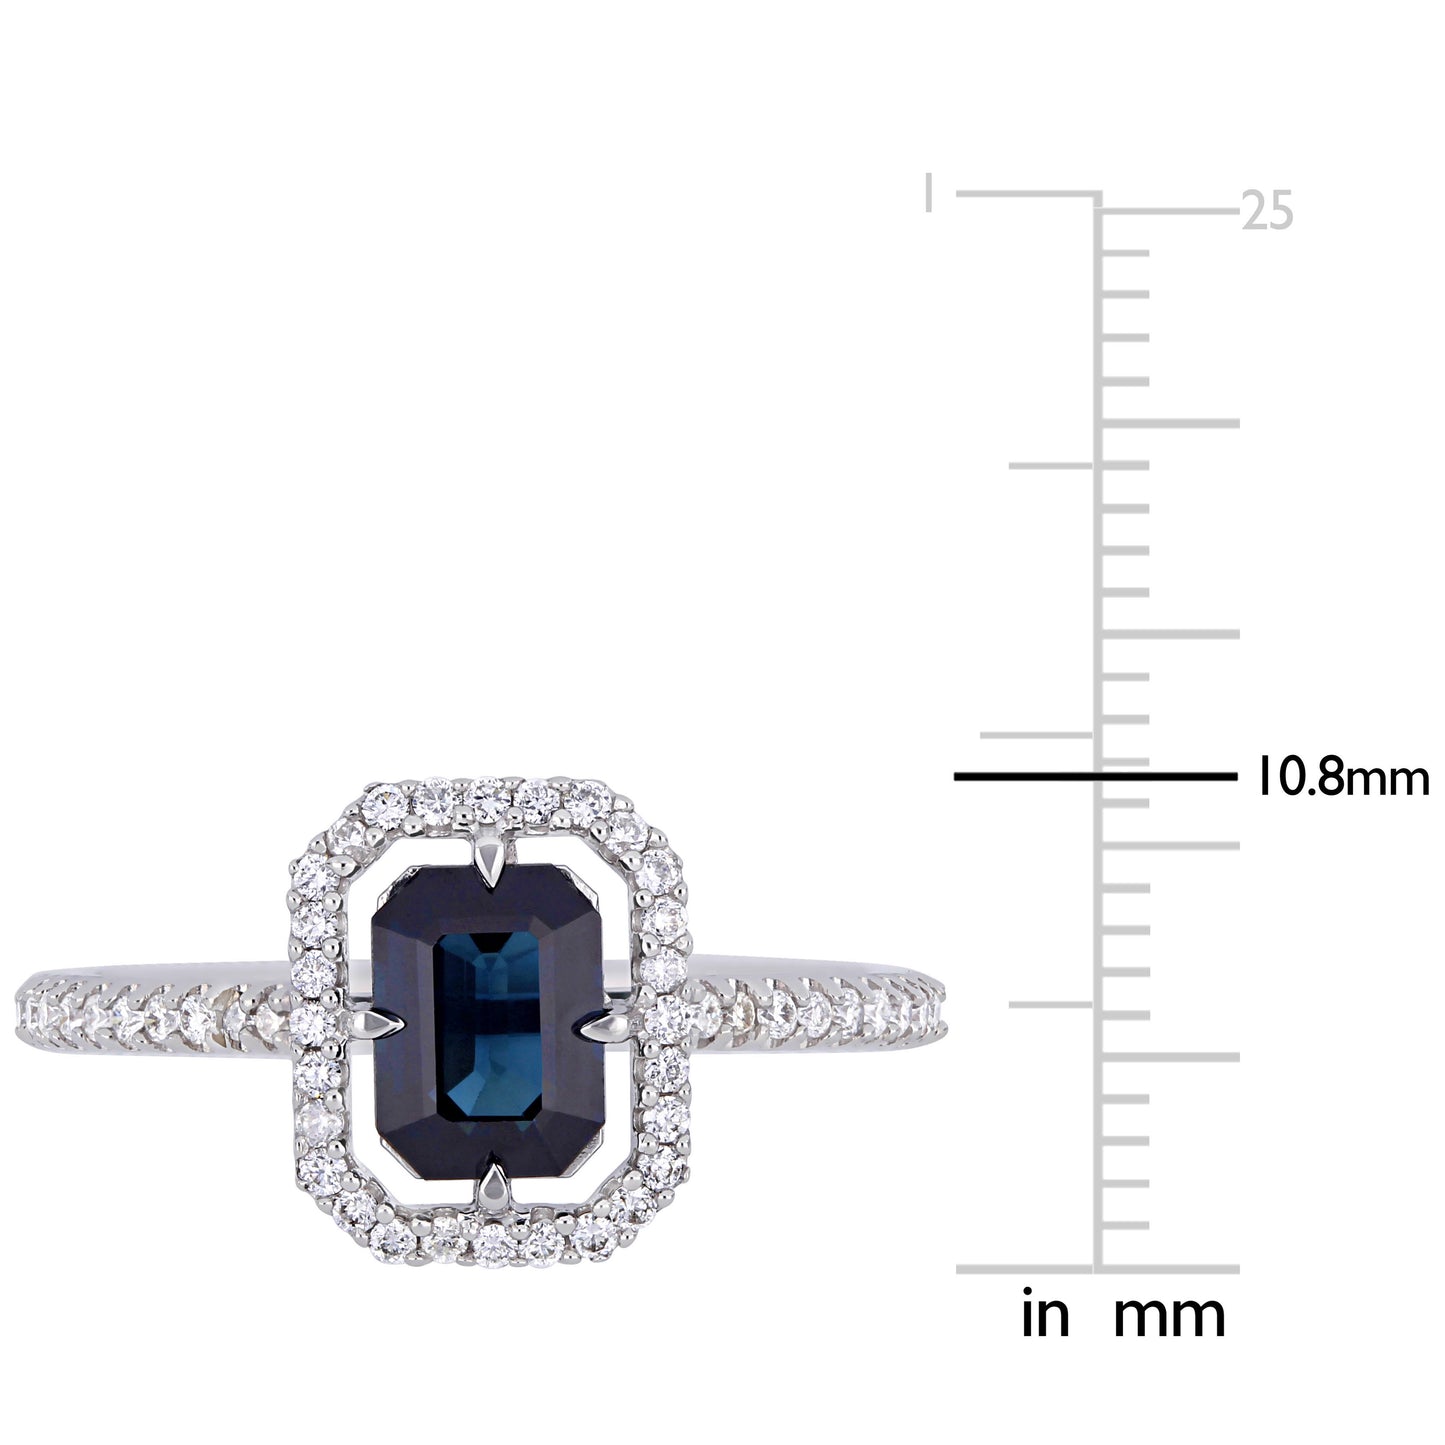 Emerald Cut Sapphire & Diamond Floating Ring in 14k White Gold